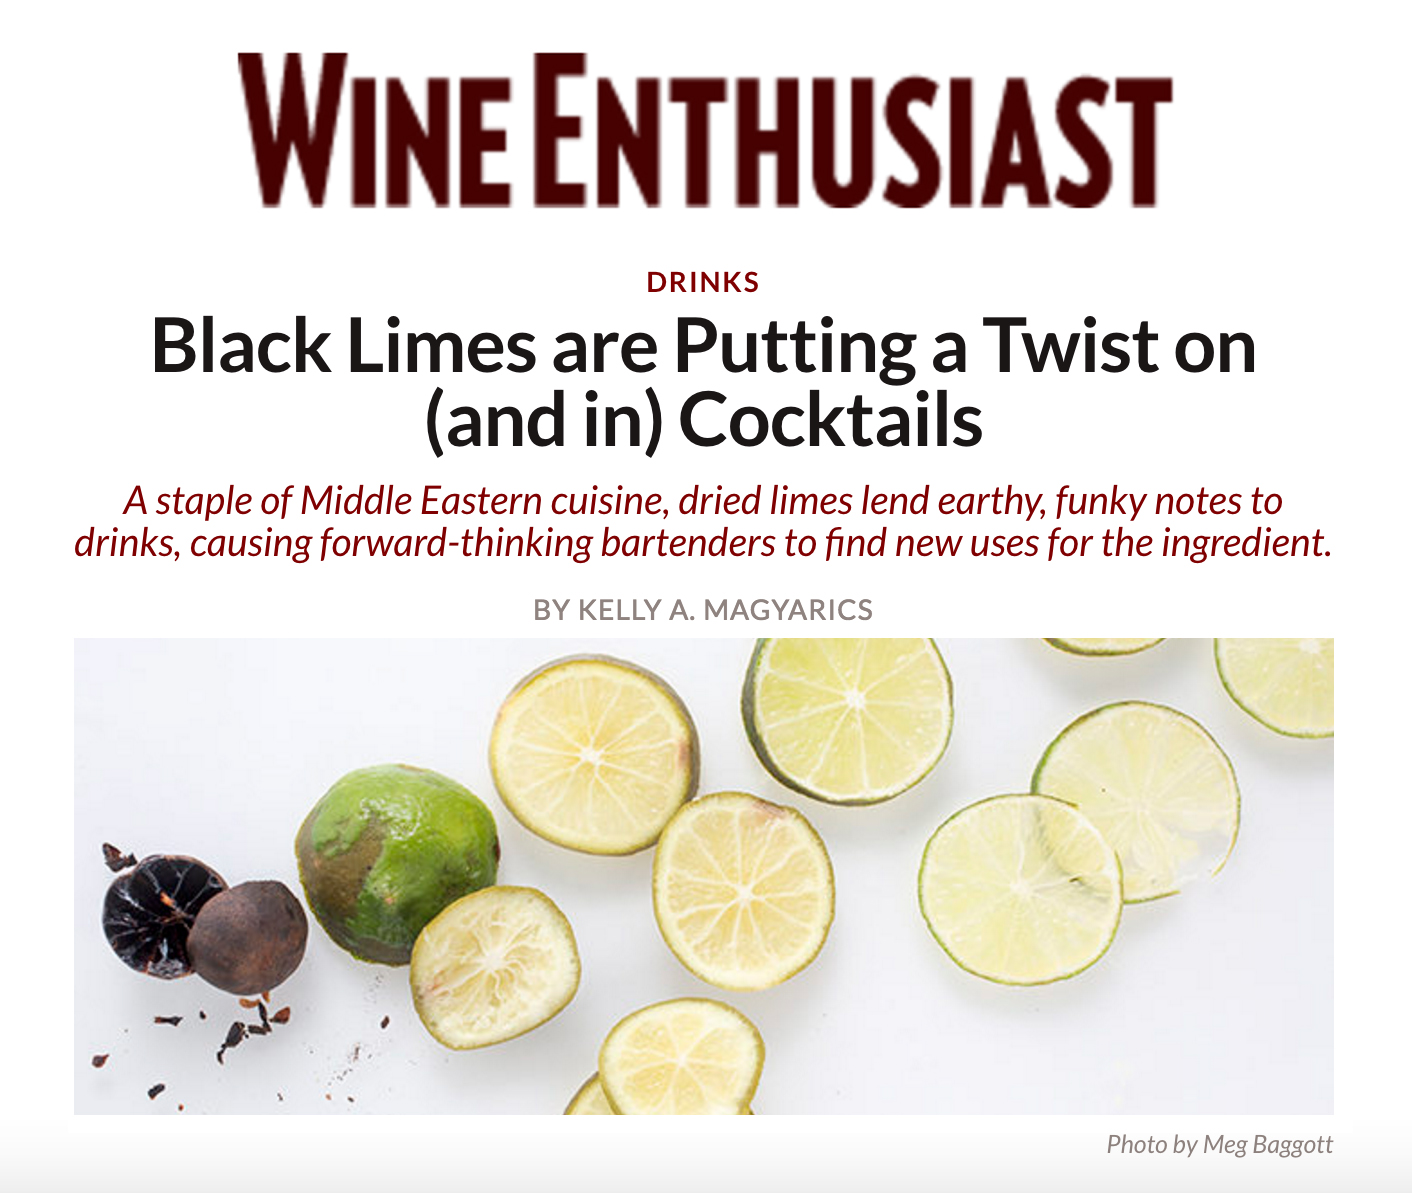 Red Owl Tavern Featured in Wine Enthusiast